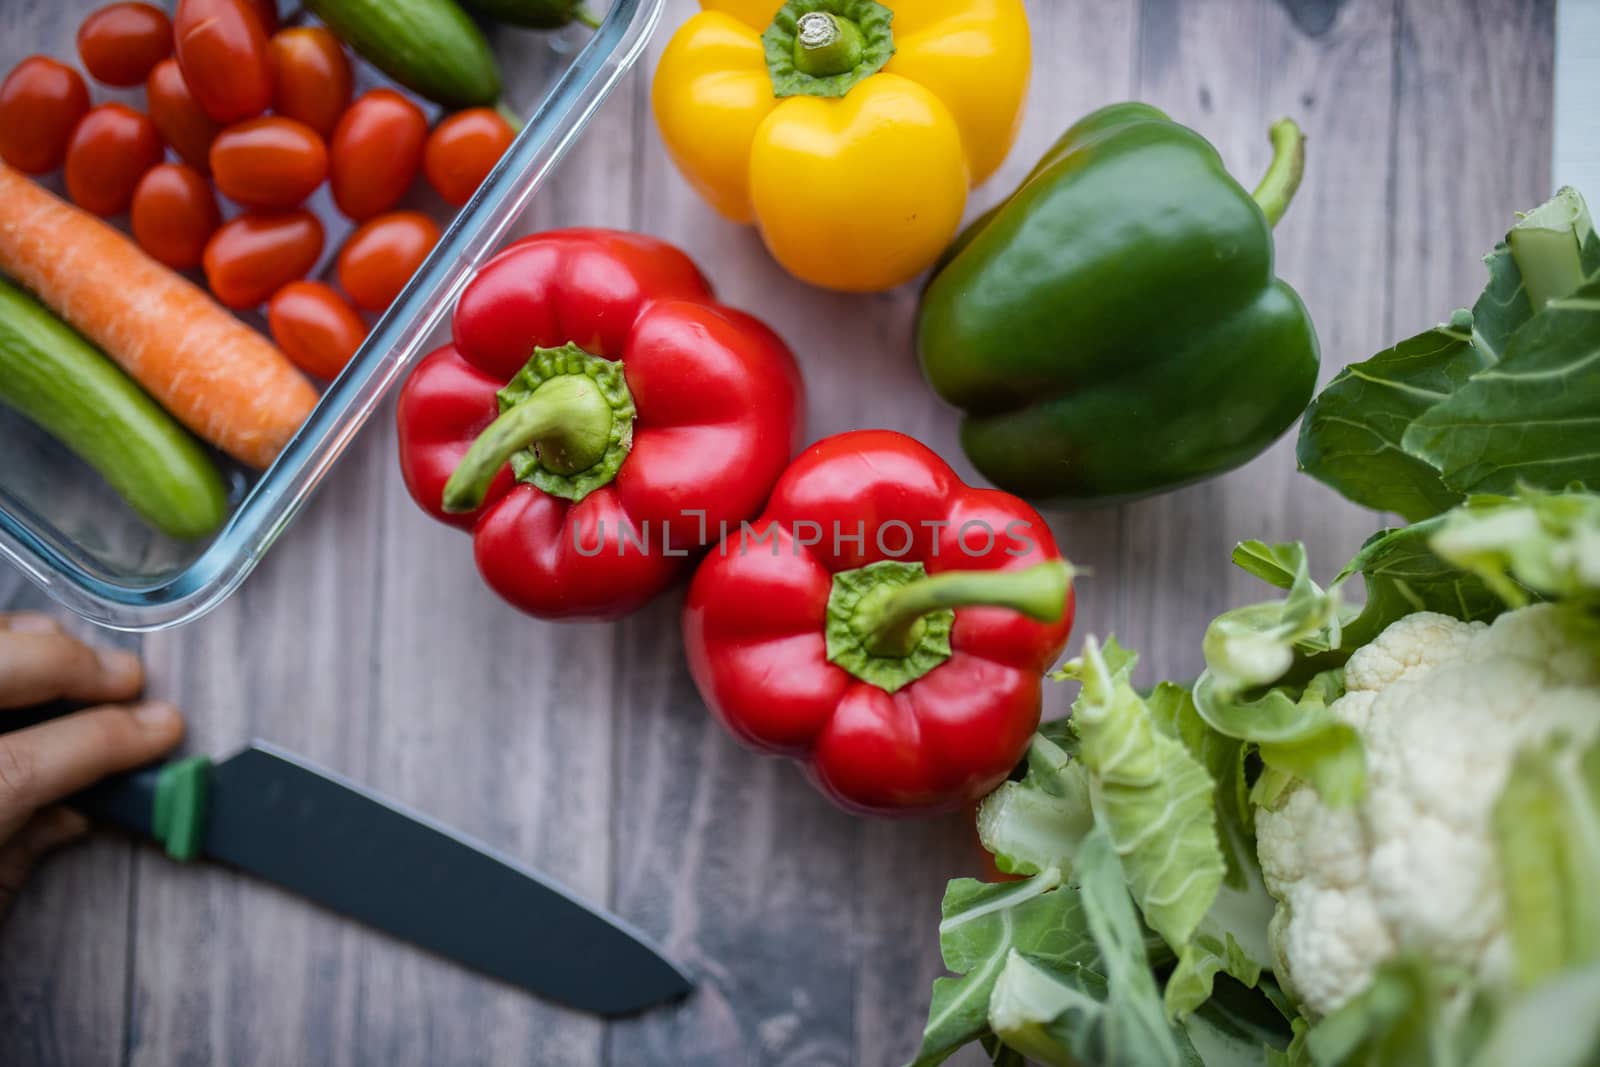 Colorful bell peppers, carrots, tomatoes, zucchini, and cauliflower on table from above. Female hand holding knife on wooden table.Vegan meal ingredients